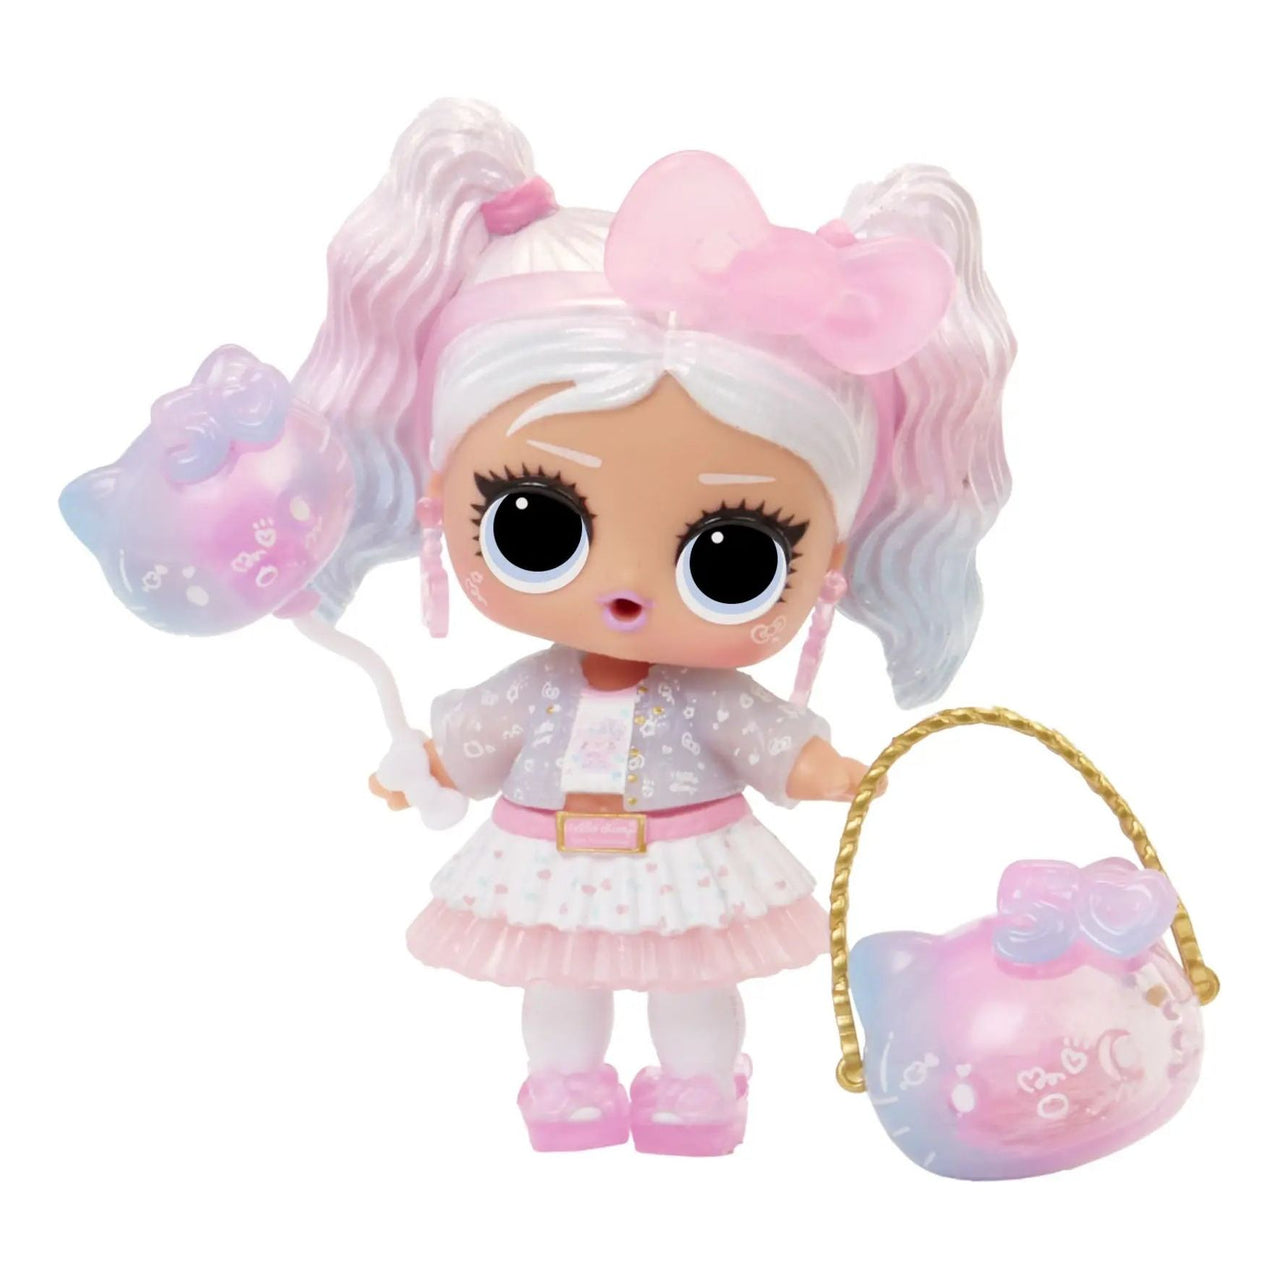 L.O.L. Surprise! Loves Hello Kitty Miss Pearly Doll LOL Surprise